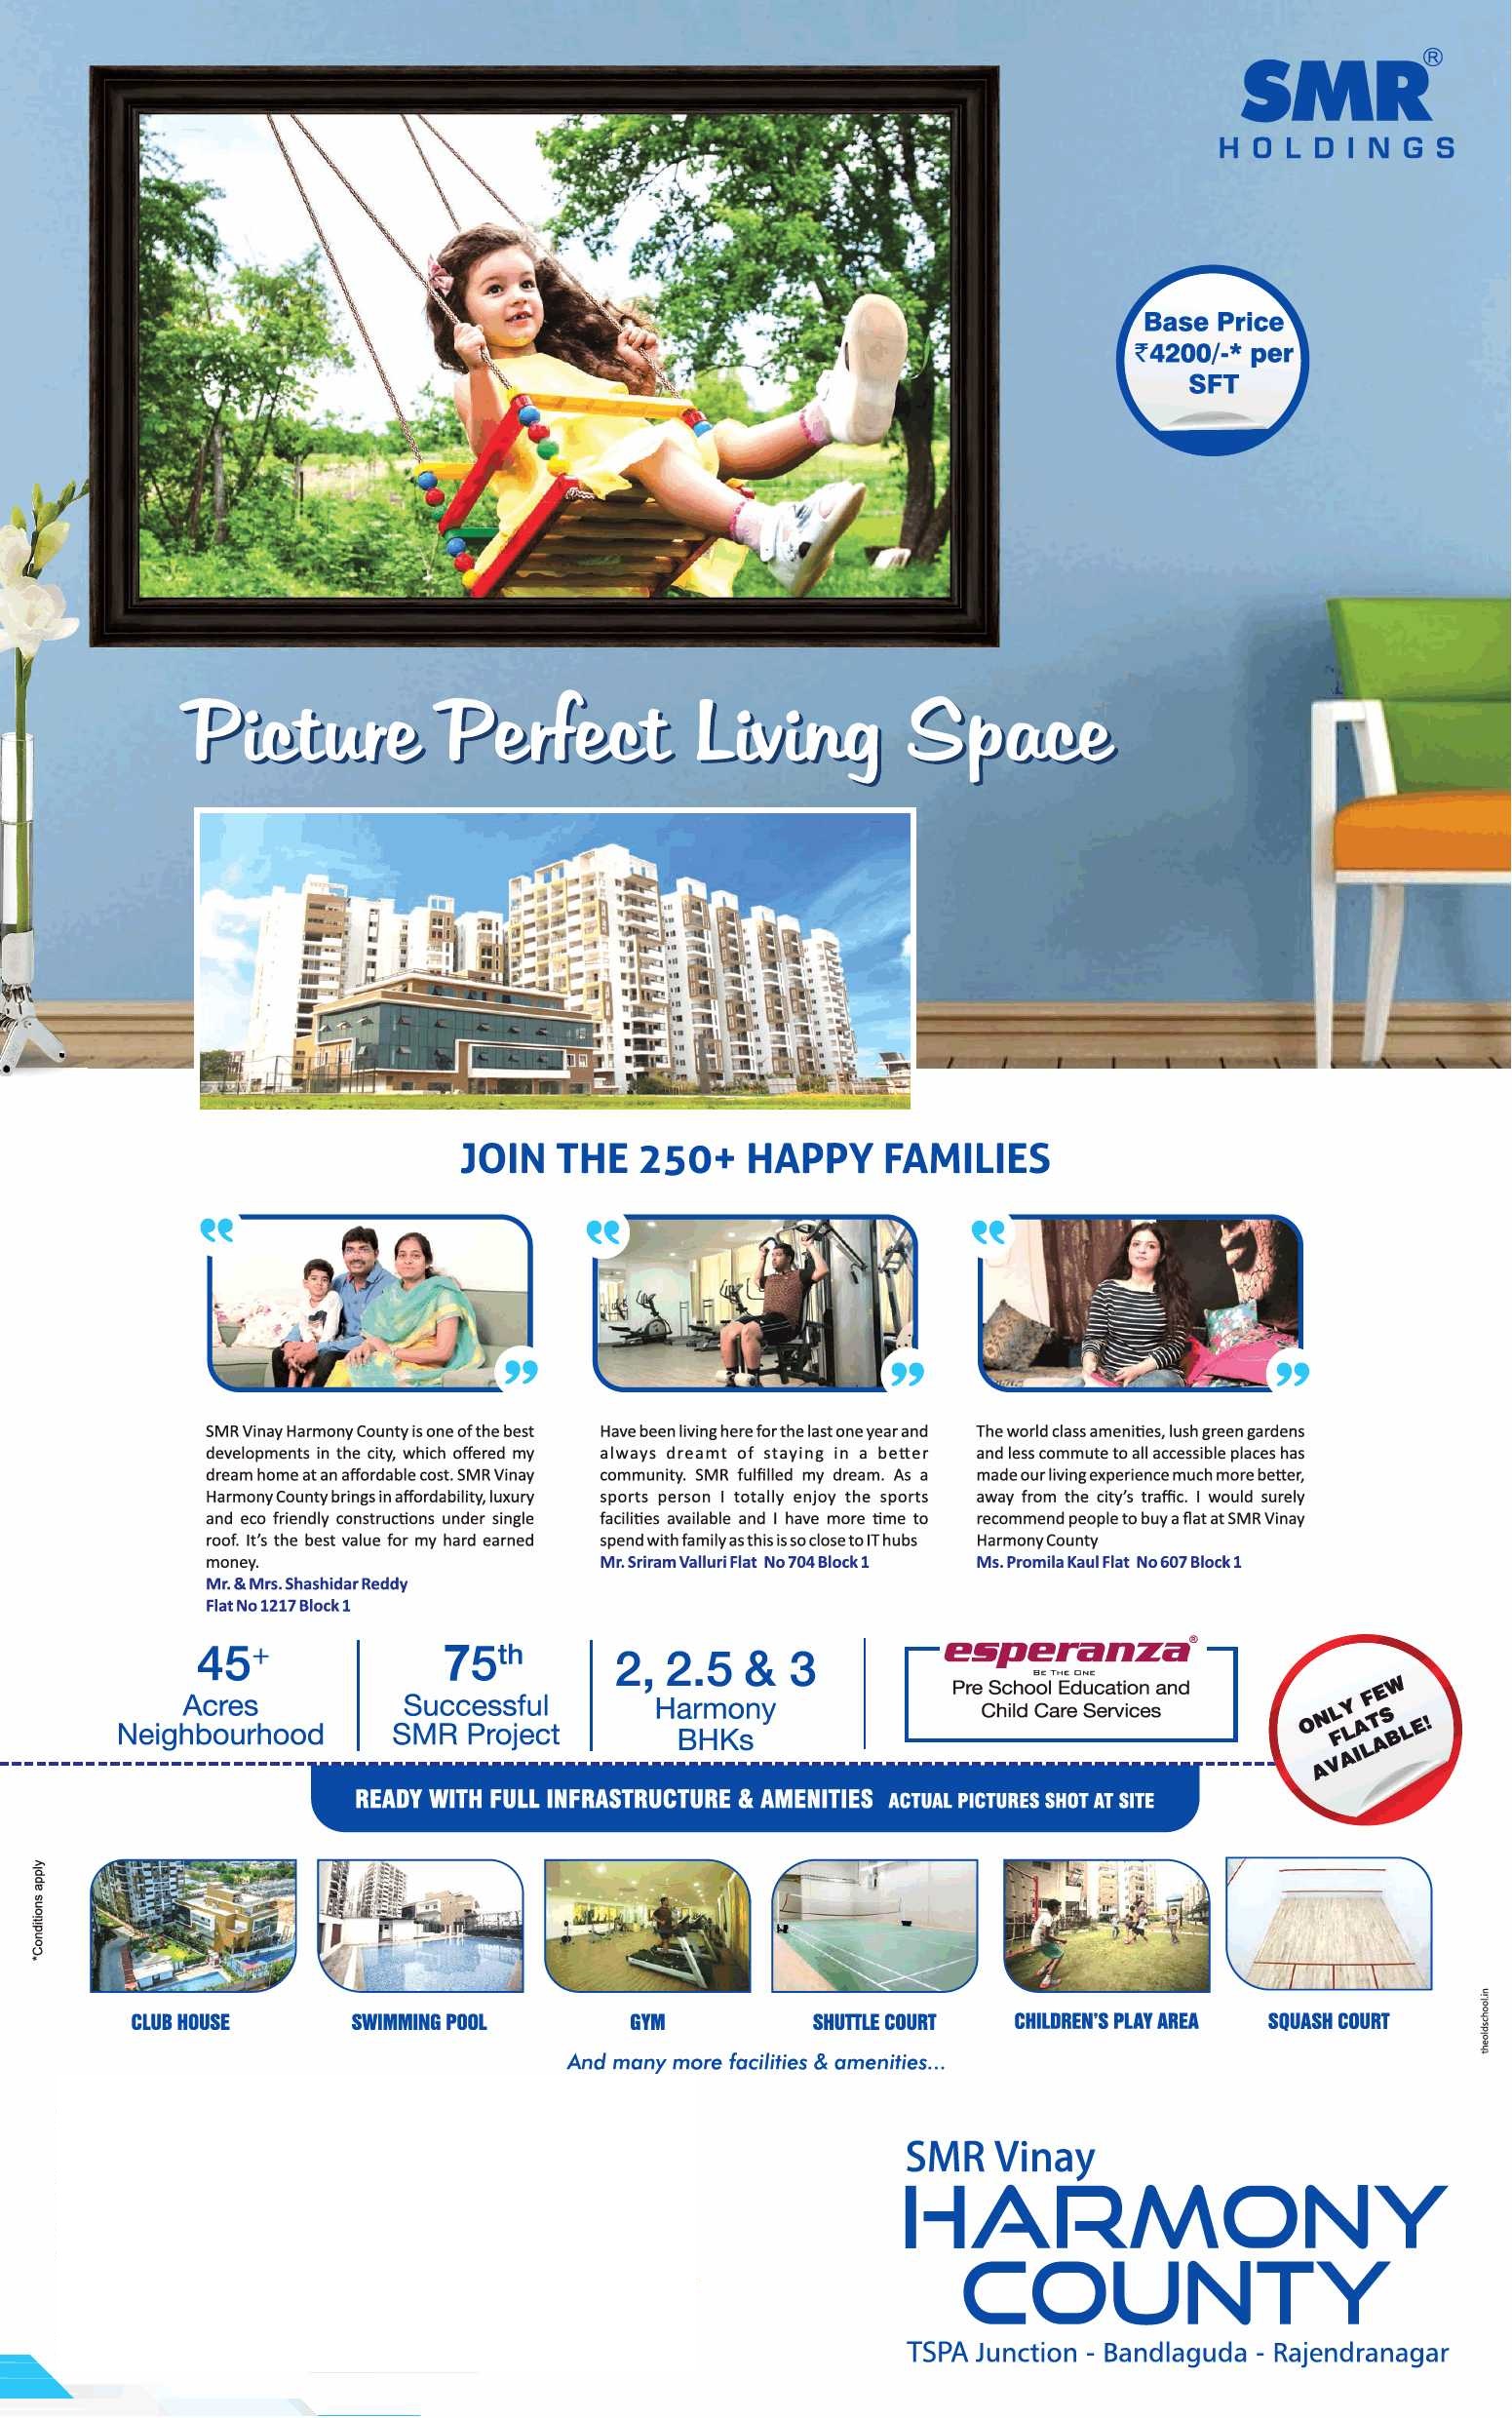 Book harmony bhk's @ 4200 per sq.ft. at SMR Vinay Harmony County in Hyderabad Update